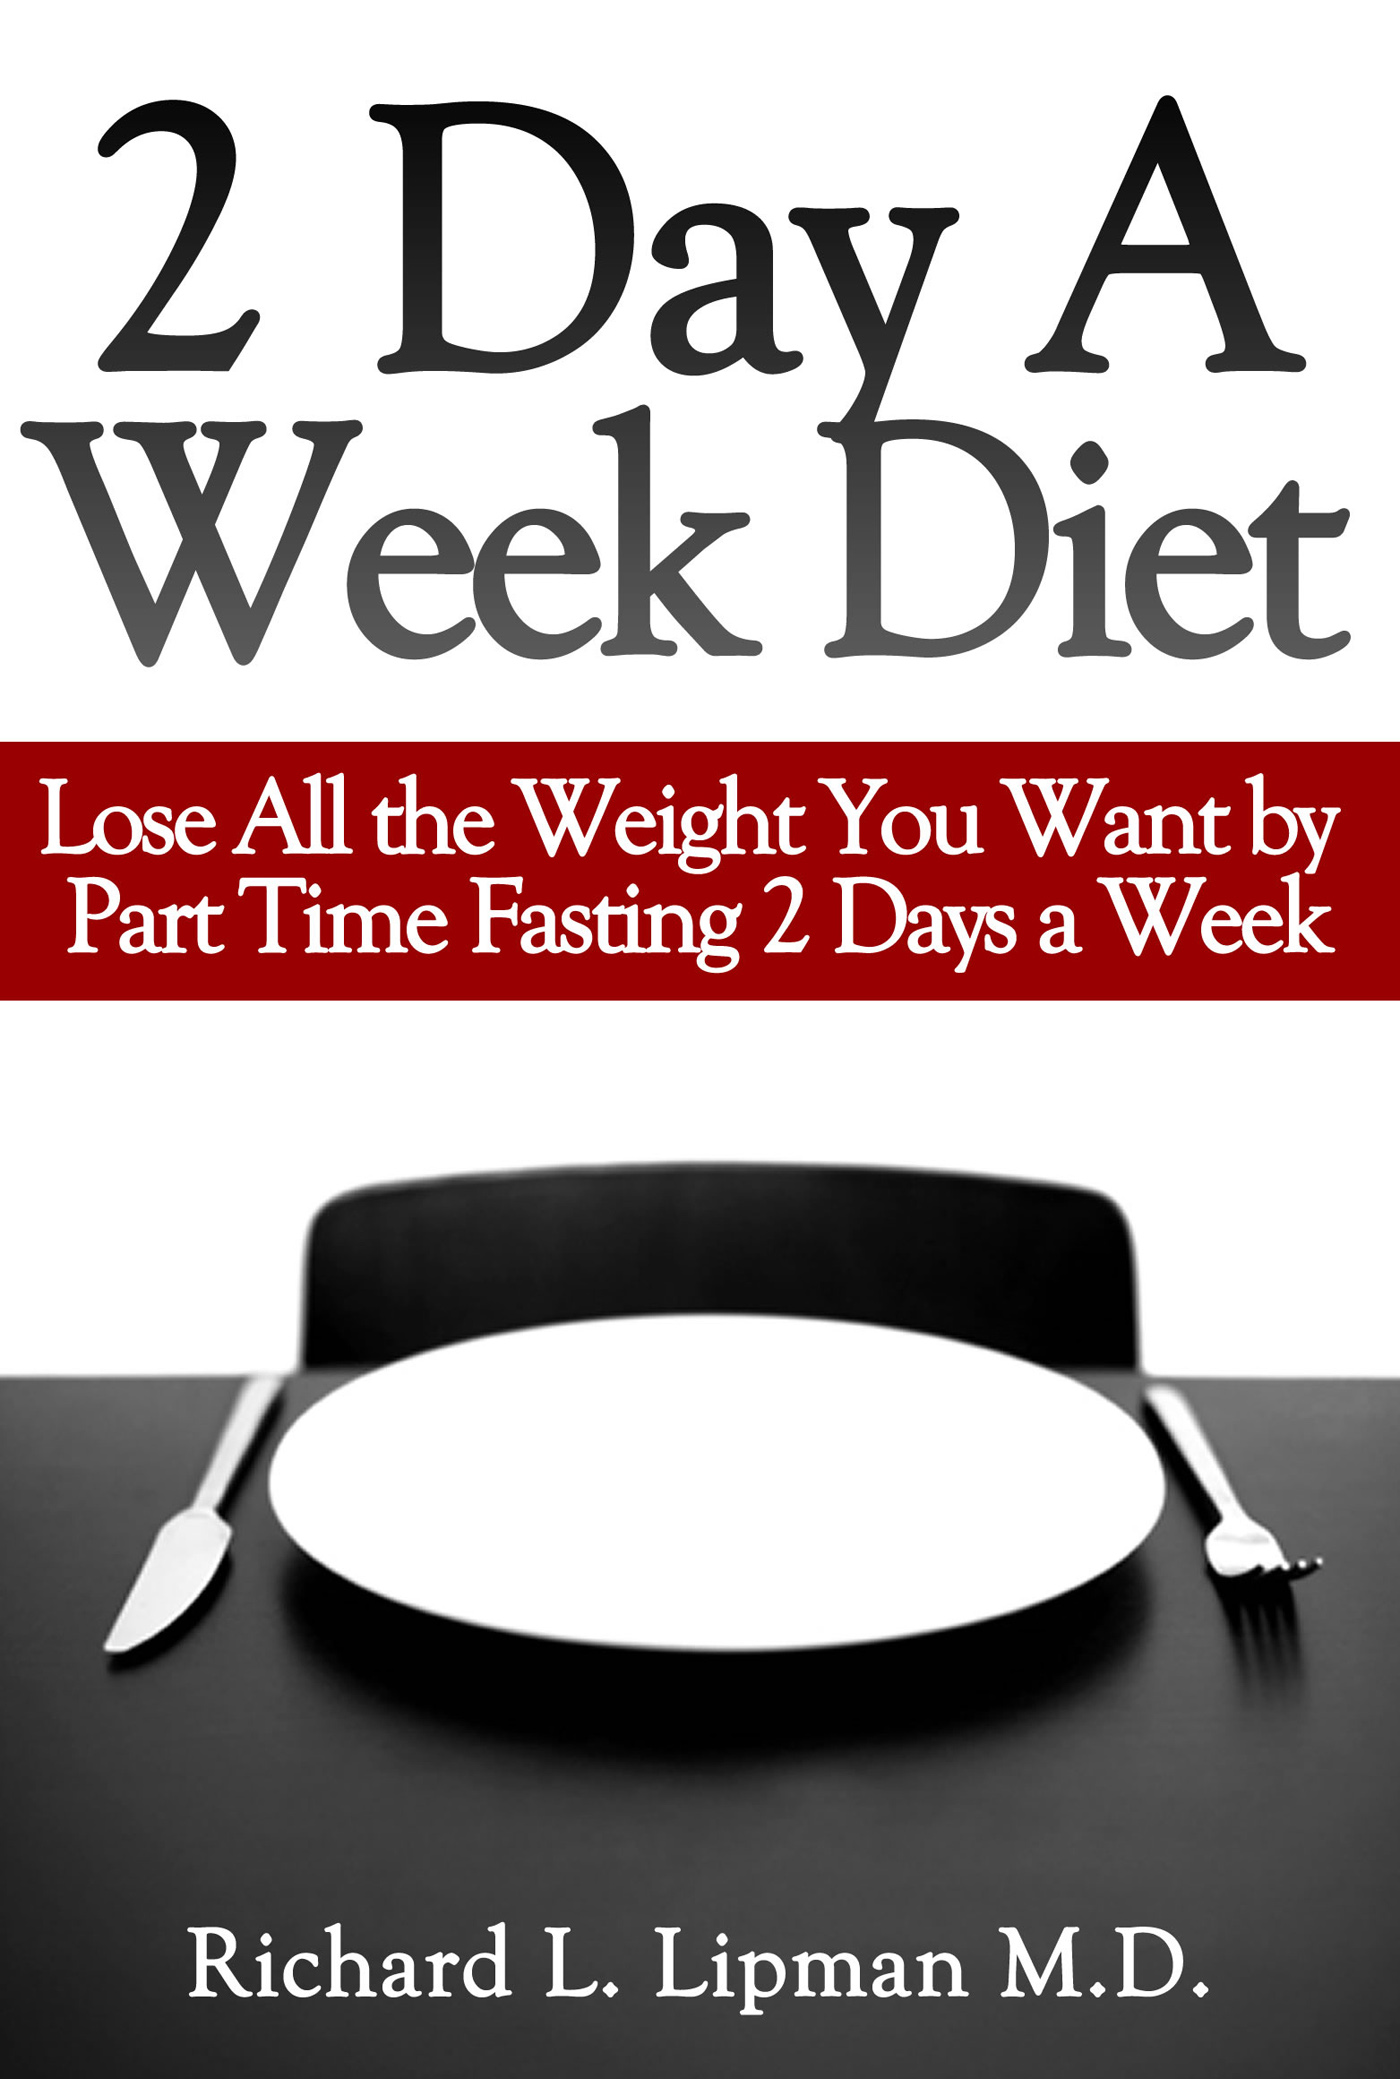 2 Day A Week Diet You Can Lose All The Weight You Want By Part Time Fasting Only 2 Days A Week An Ebook By Richard Lipman Md